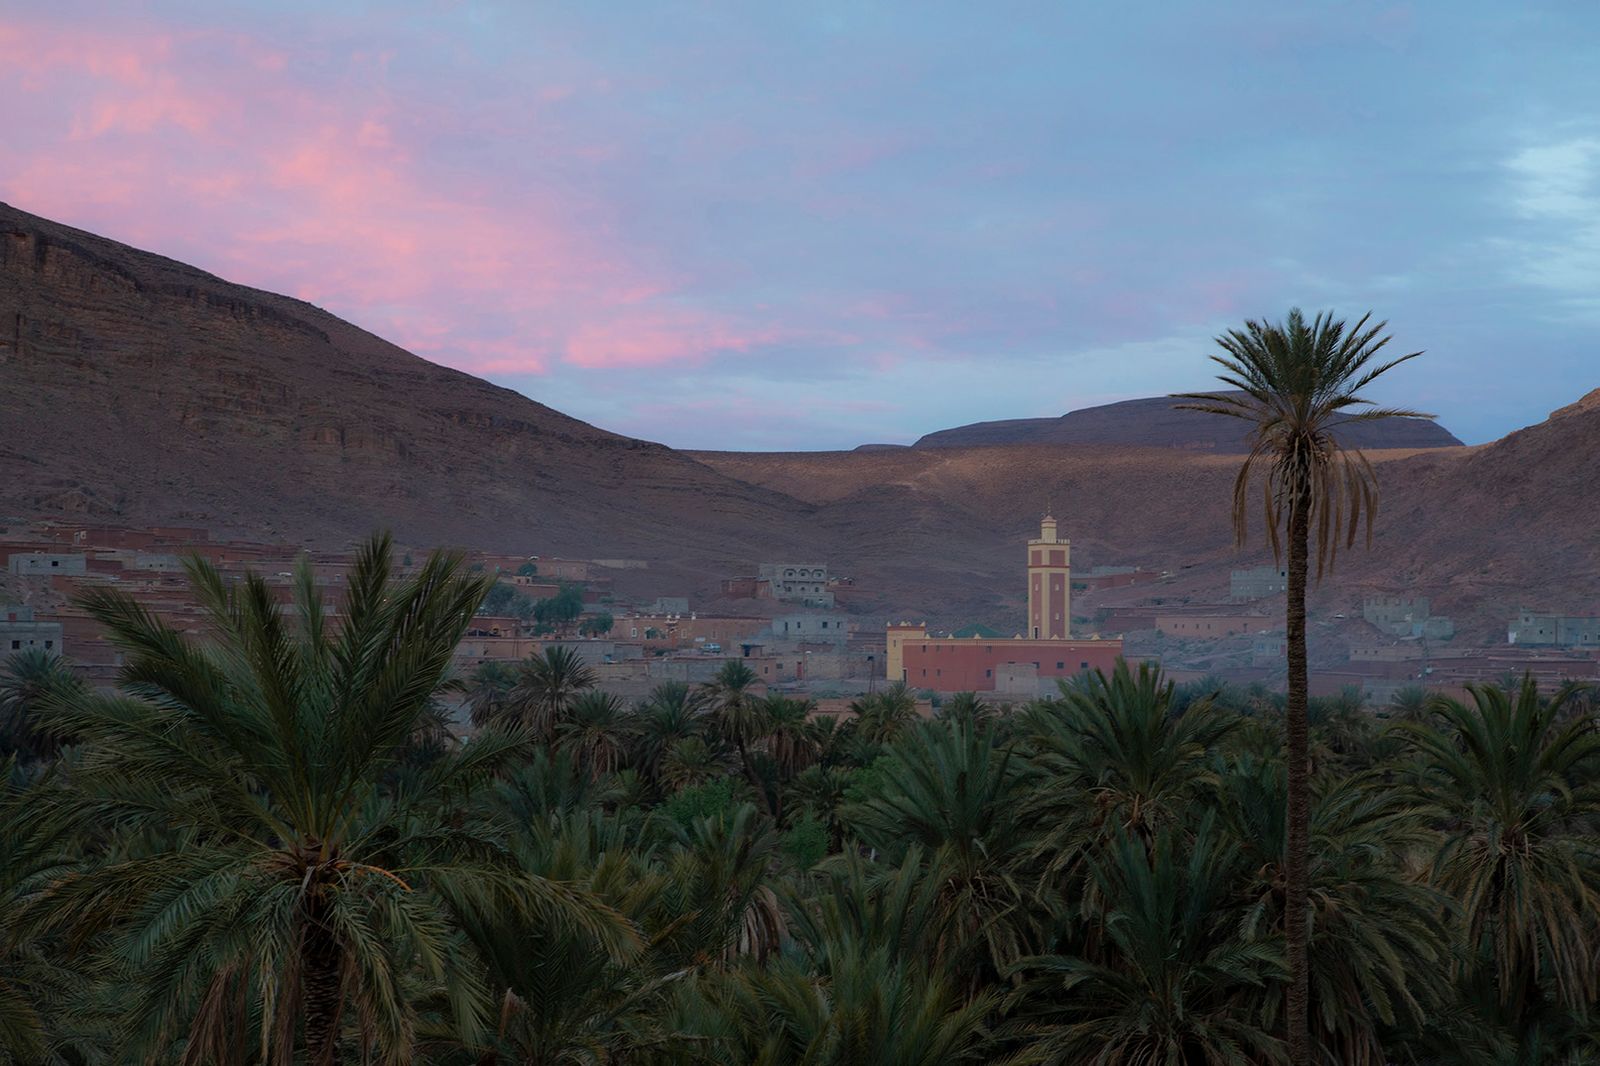 © Matilde Gattoni - Morocco - Fint - Sun rises on the Oasis of Fint, one of the best preserved oasis in Morocco.